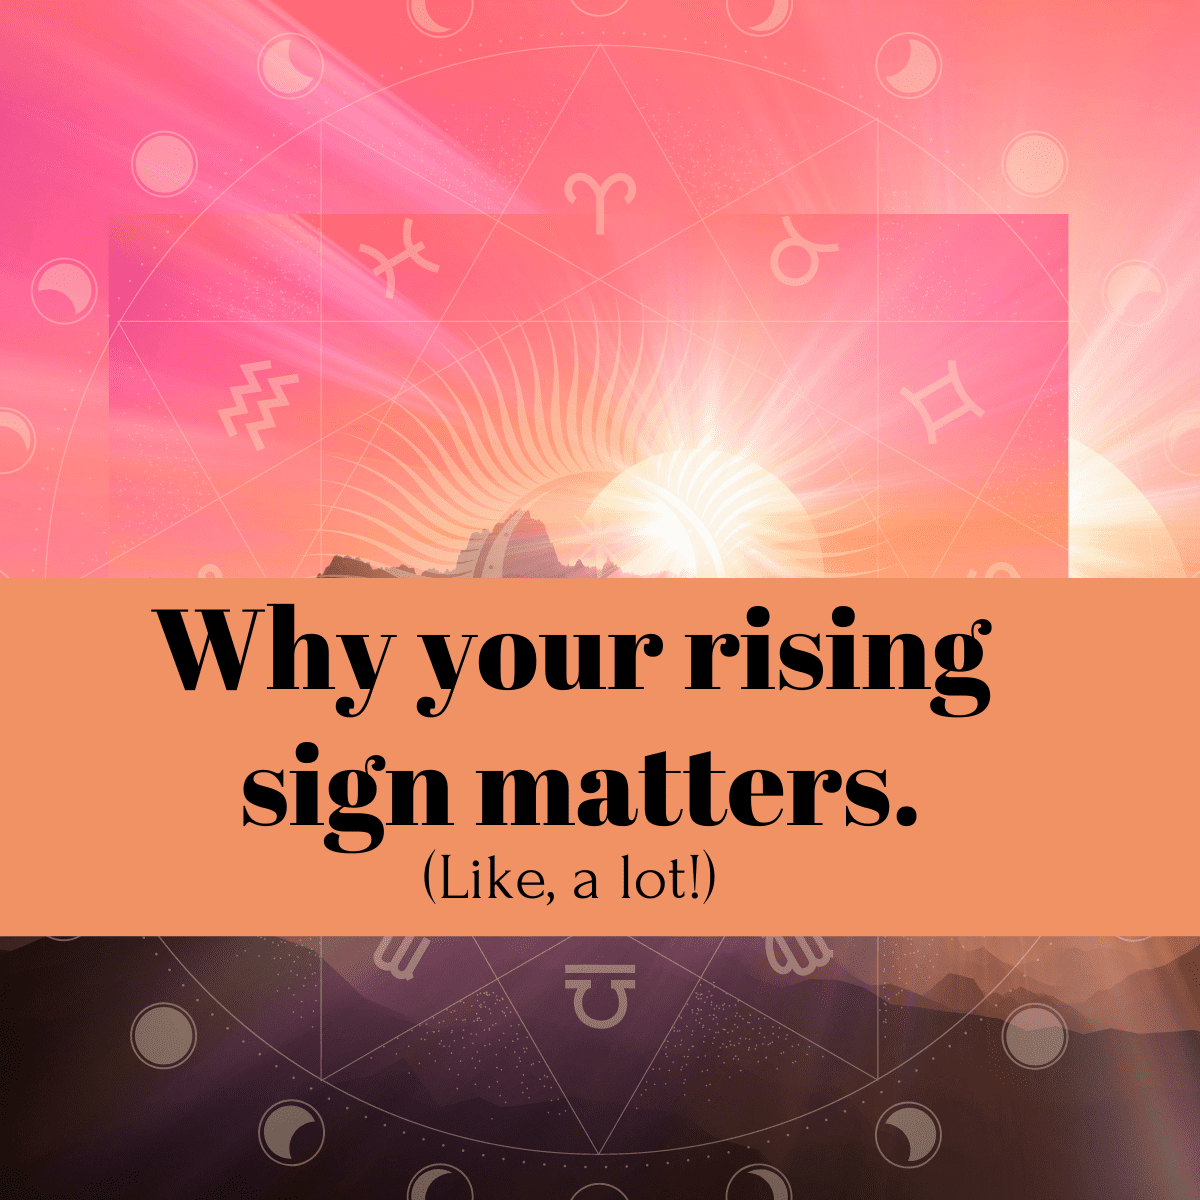 The sun sits on the horizon in the background, covered in digital images of the zodiac signs. Text reads "Why your rising sign matters. Like, a lot!)